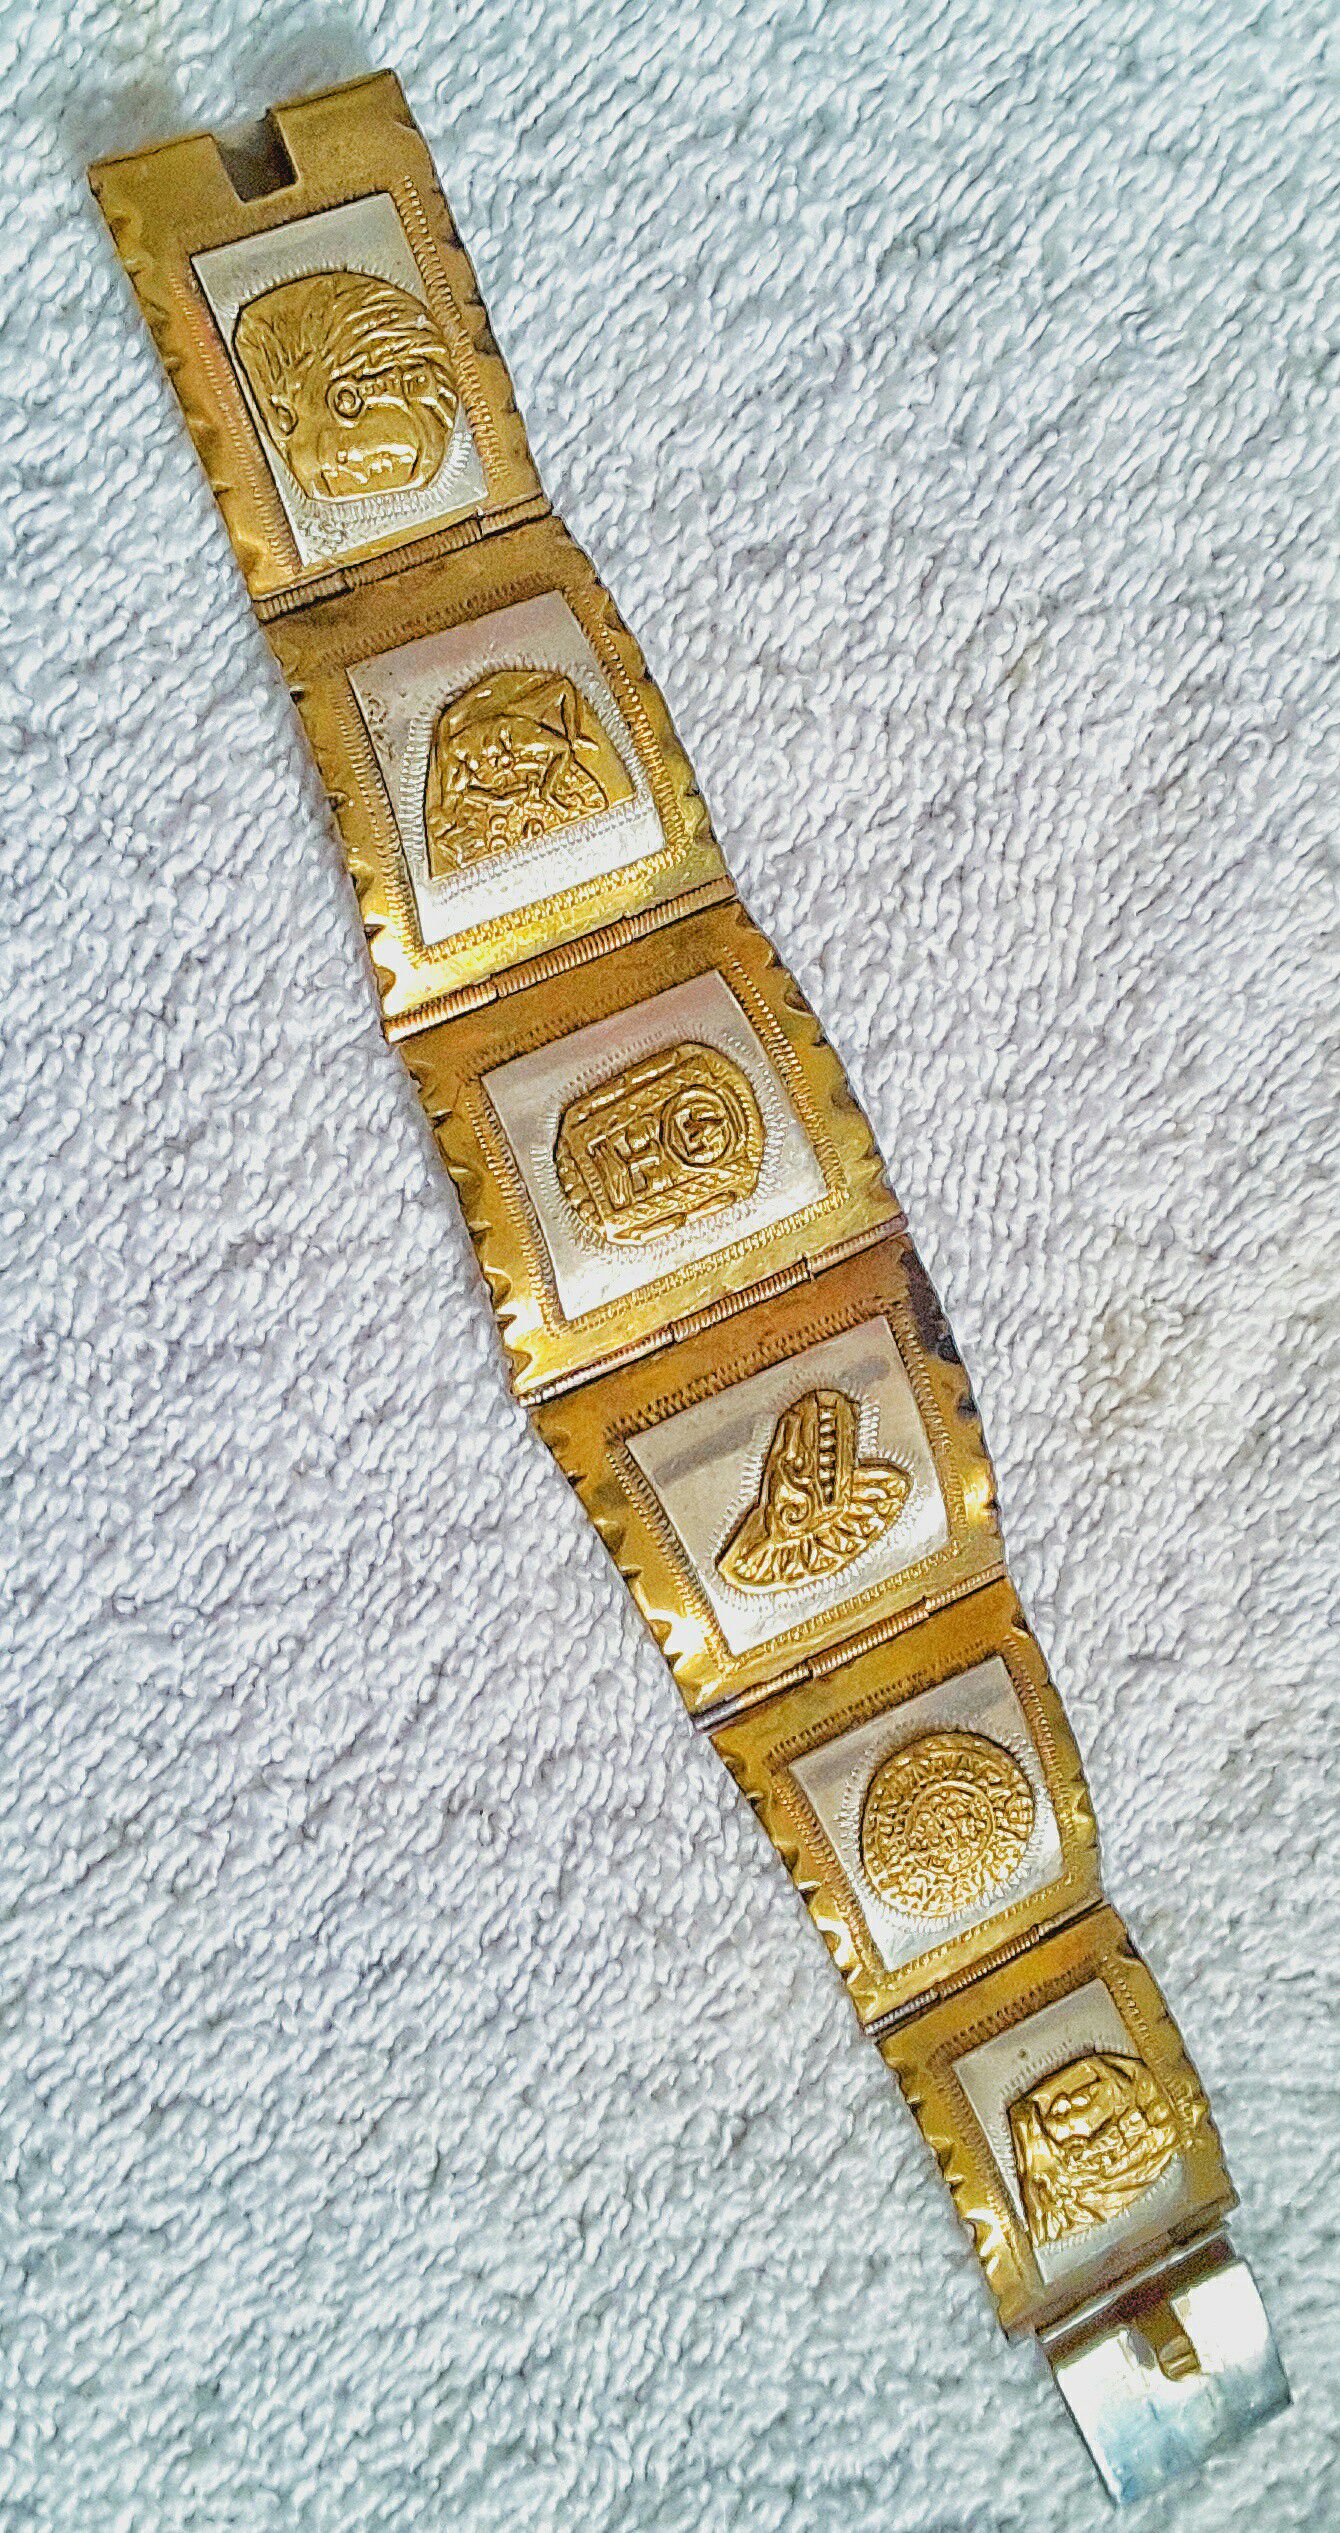 Taxco Mexican Sterling silver 925 Cuff bracelet w AZTEC design & Gold Panels MADE IN MEXICO